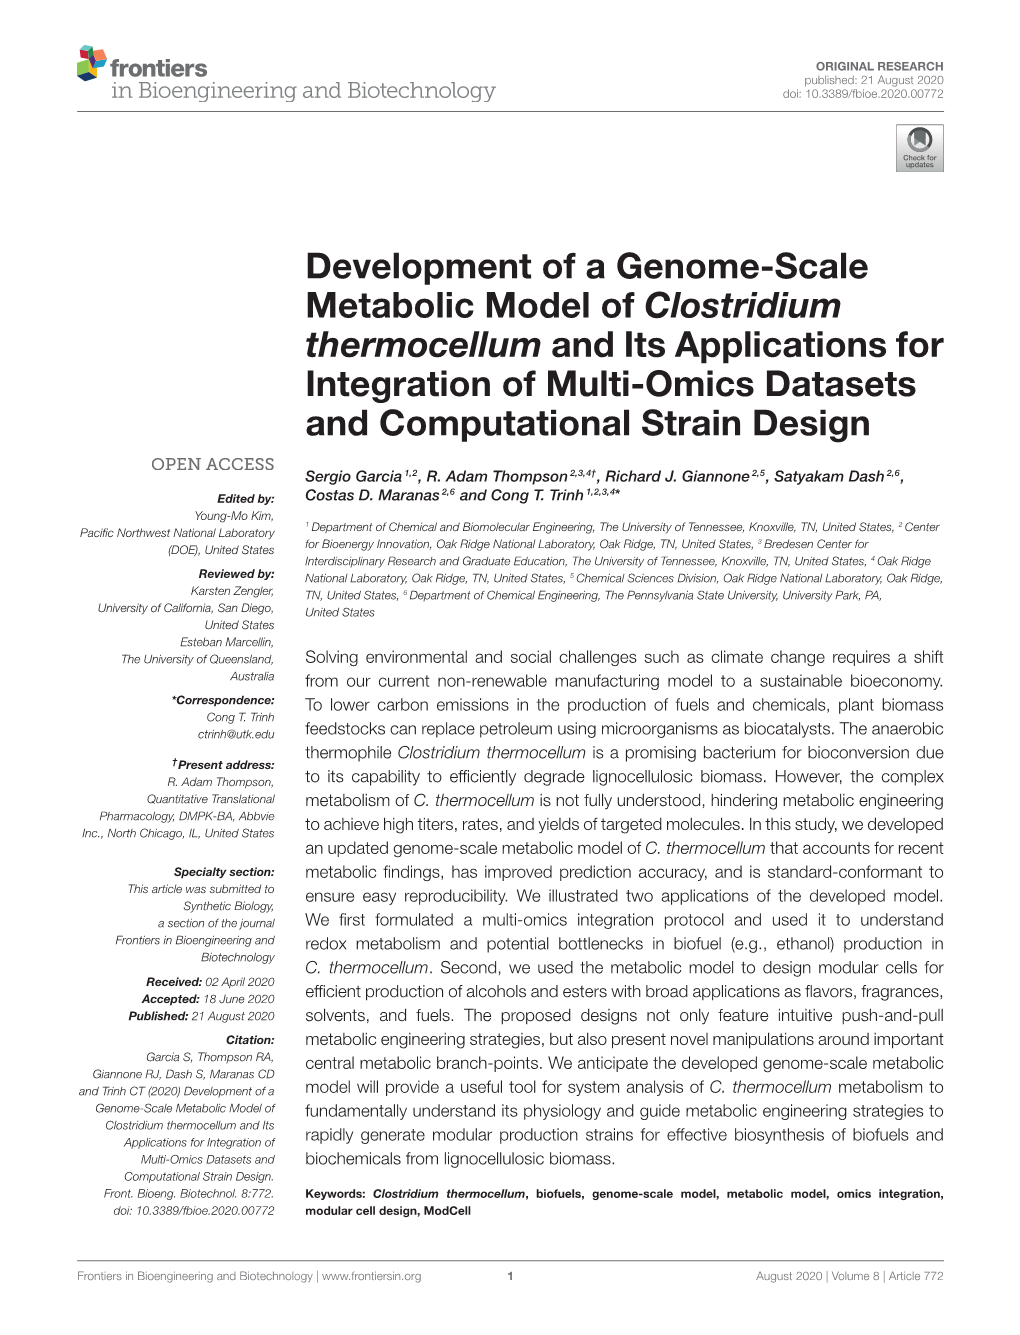 Development of a Genome-Scale Metabolic Model of Clostridium Thermocellum and Its Applications for Integration of Multi-Omics Datasets and Computational Strain Design